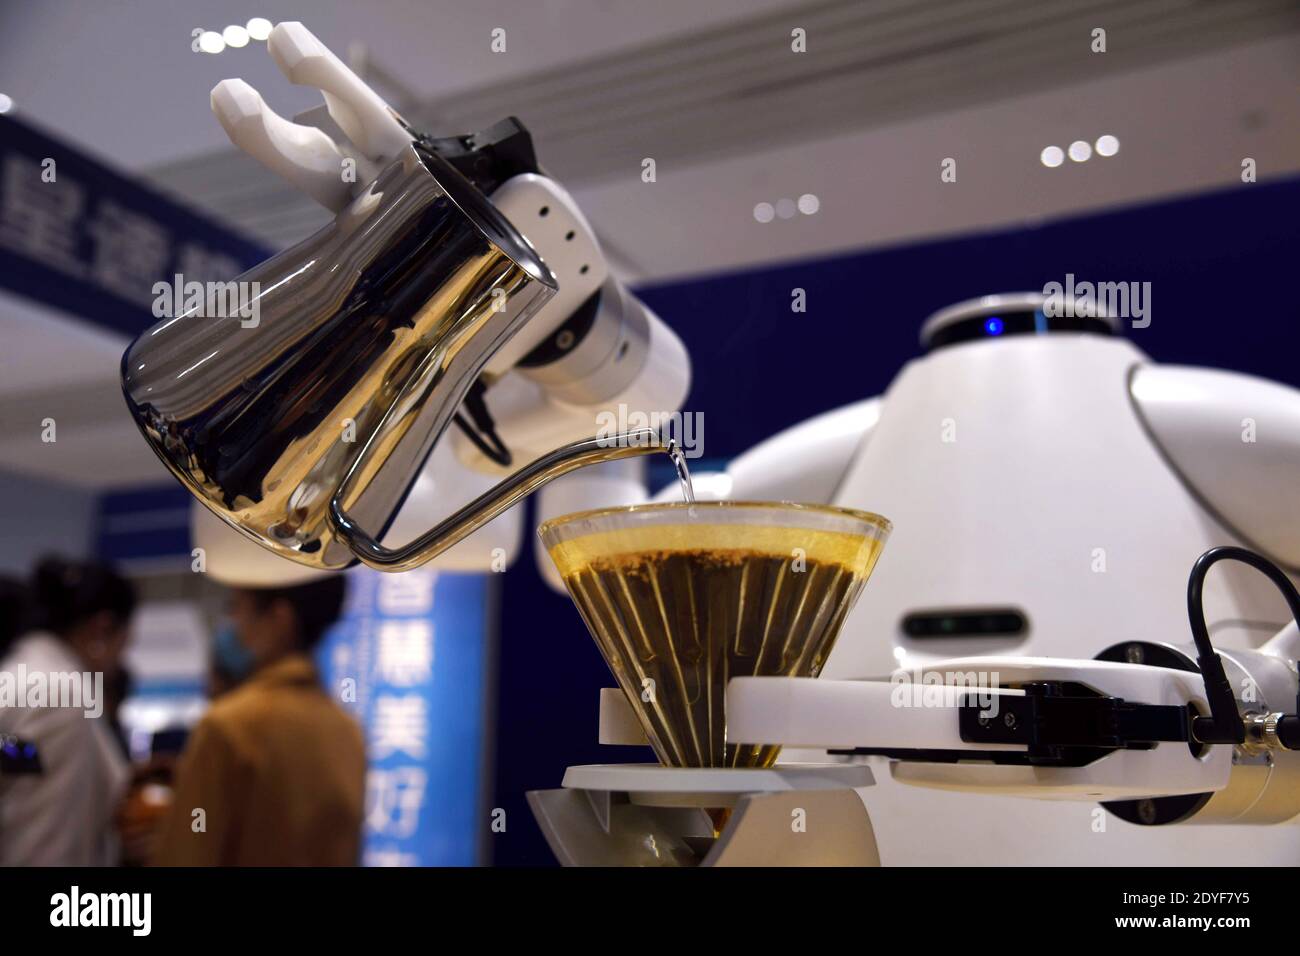 Beijing, China's Shandong Province. 25th Dec, 2020. A robot makes coffee at the China (Qingdao) Top Services Robot Show in Qingdao, east China's Shandong Province, Dec. 25, 2020. The China (Qingdao) Top Services Robot Show kicked off here on Friday. Credit: Li Ziheng/Xinhua/Alamy Live News Stock Photo